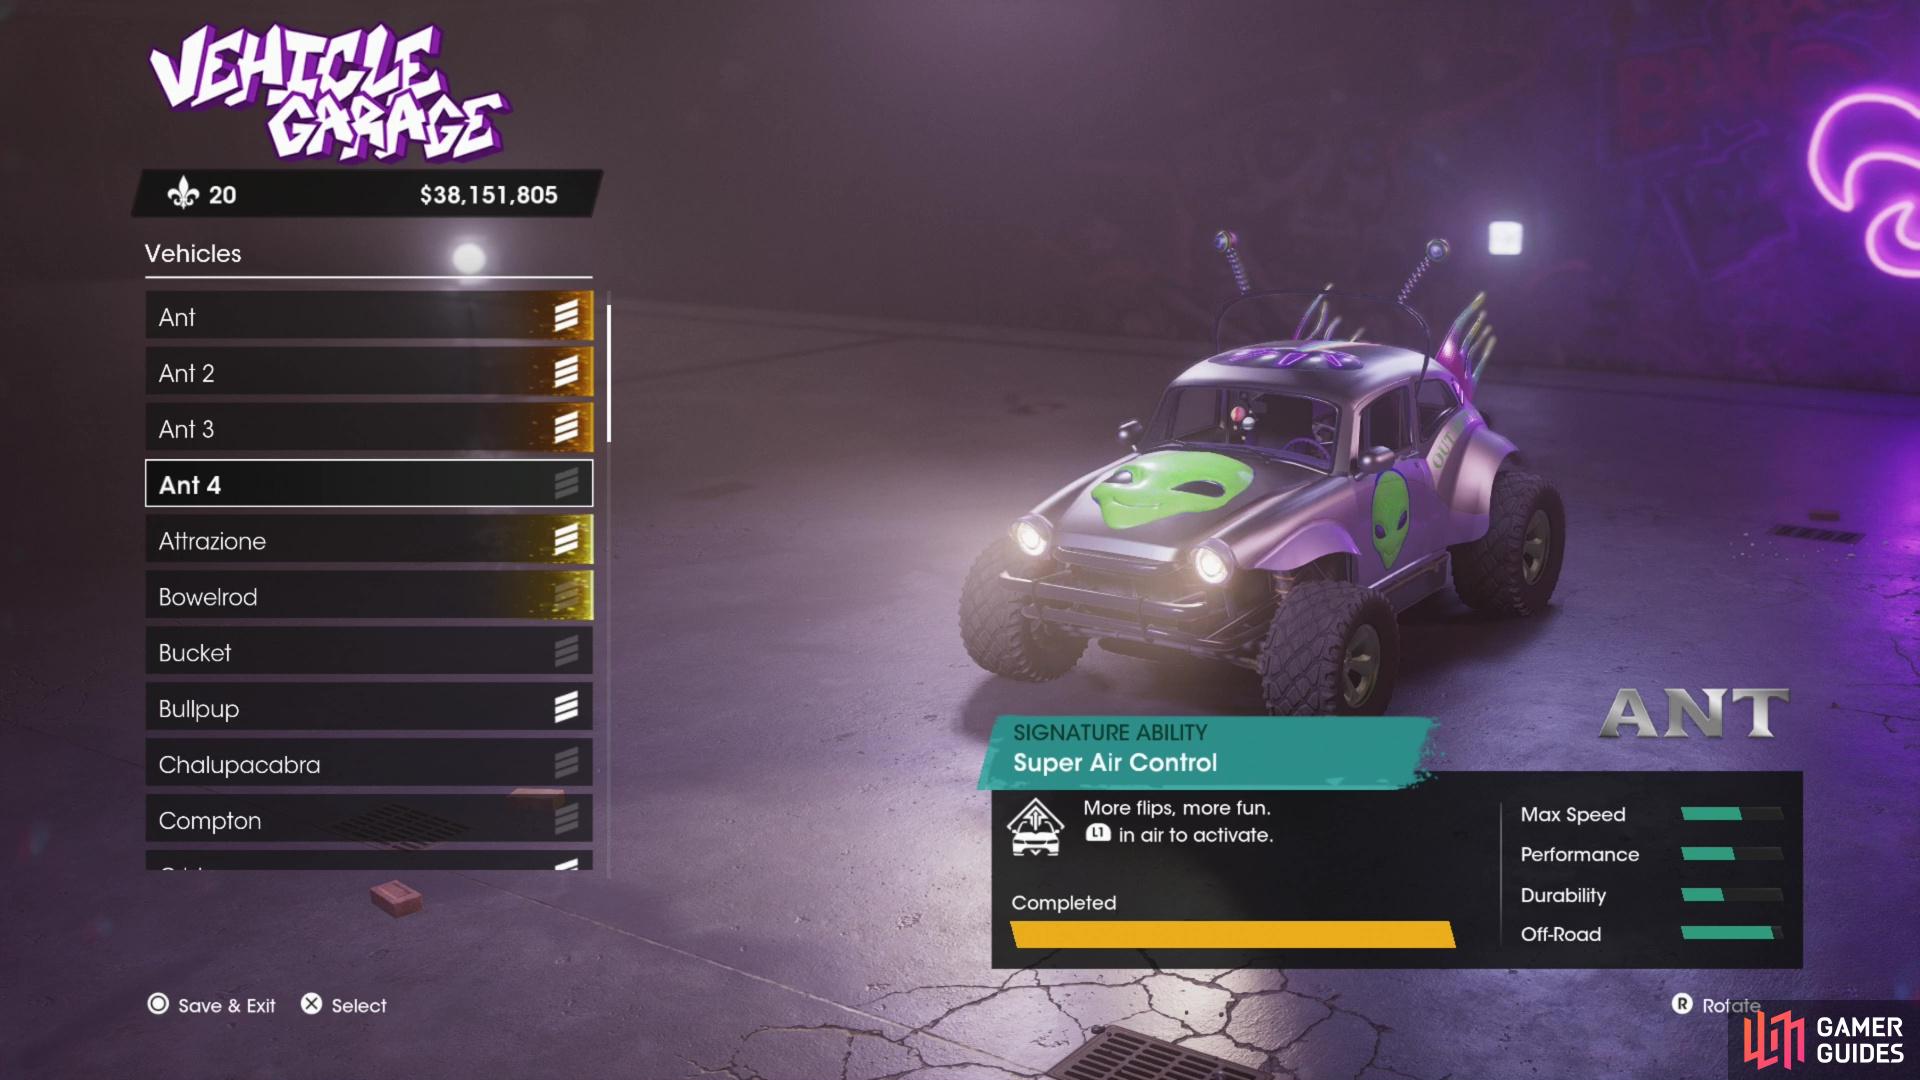 Find all five parts of the Lost Dust Buggy and it will appear in your garage.